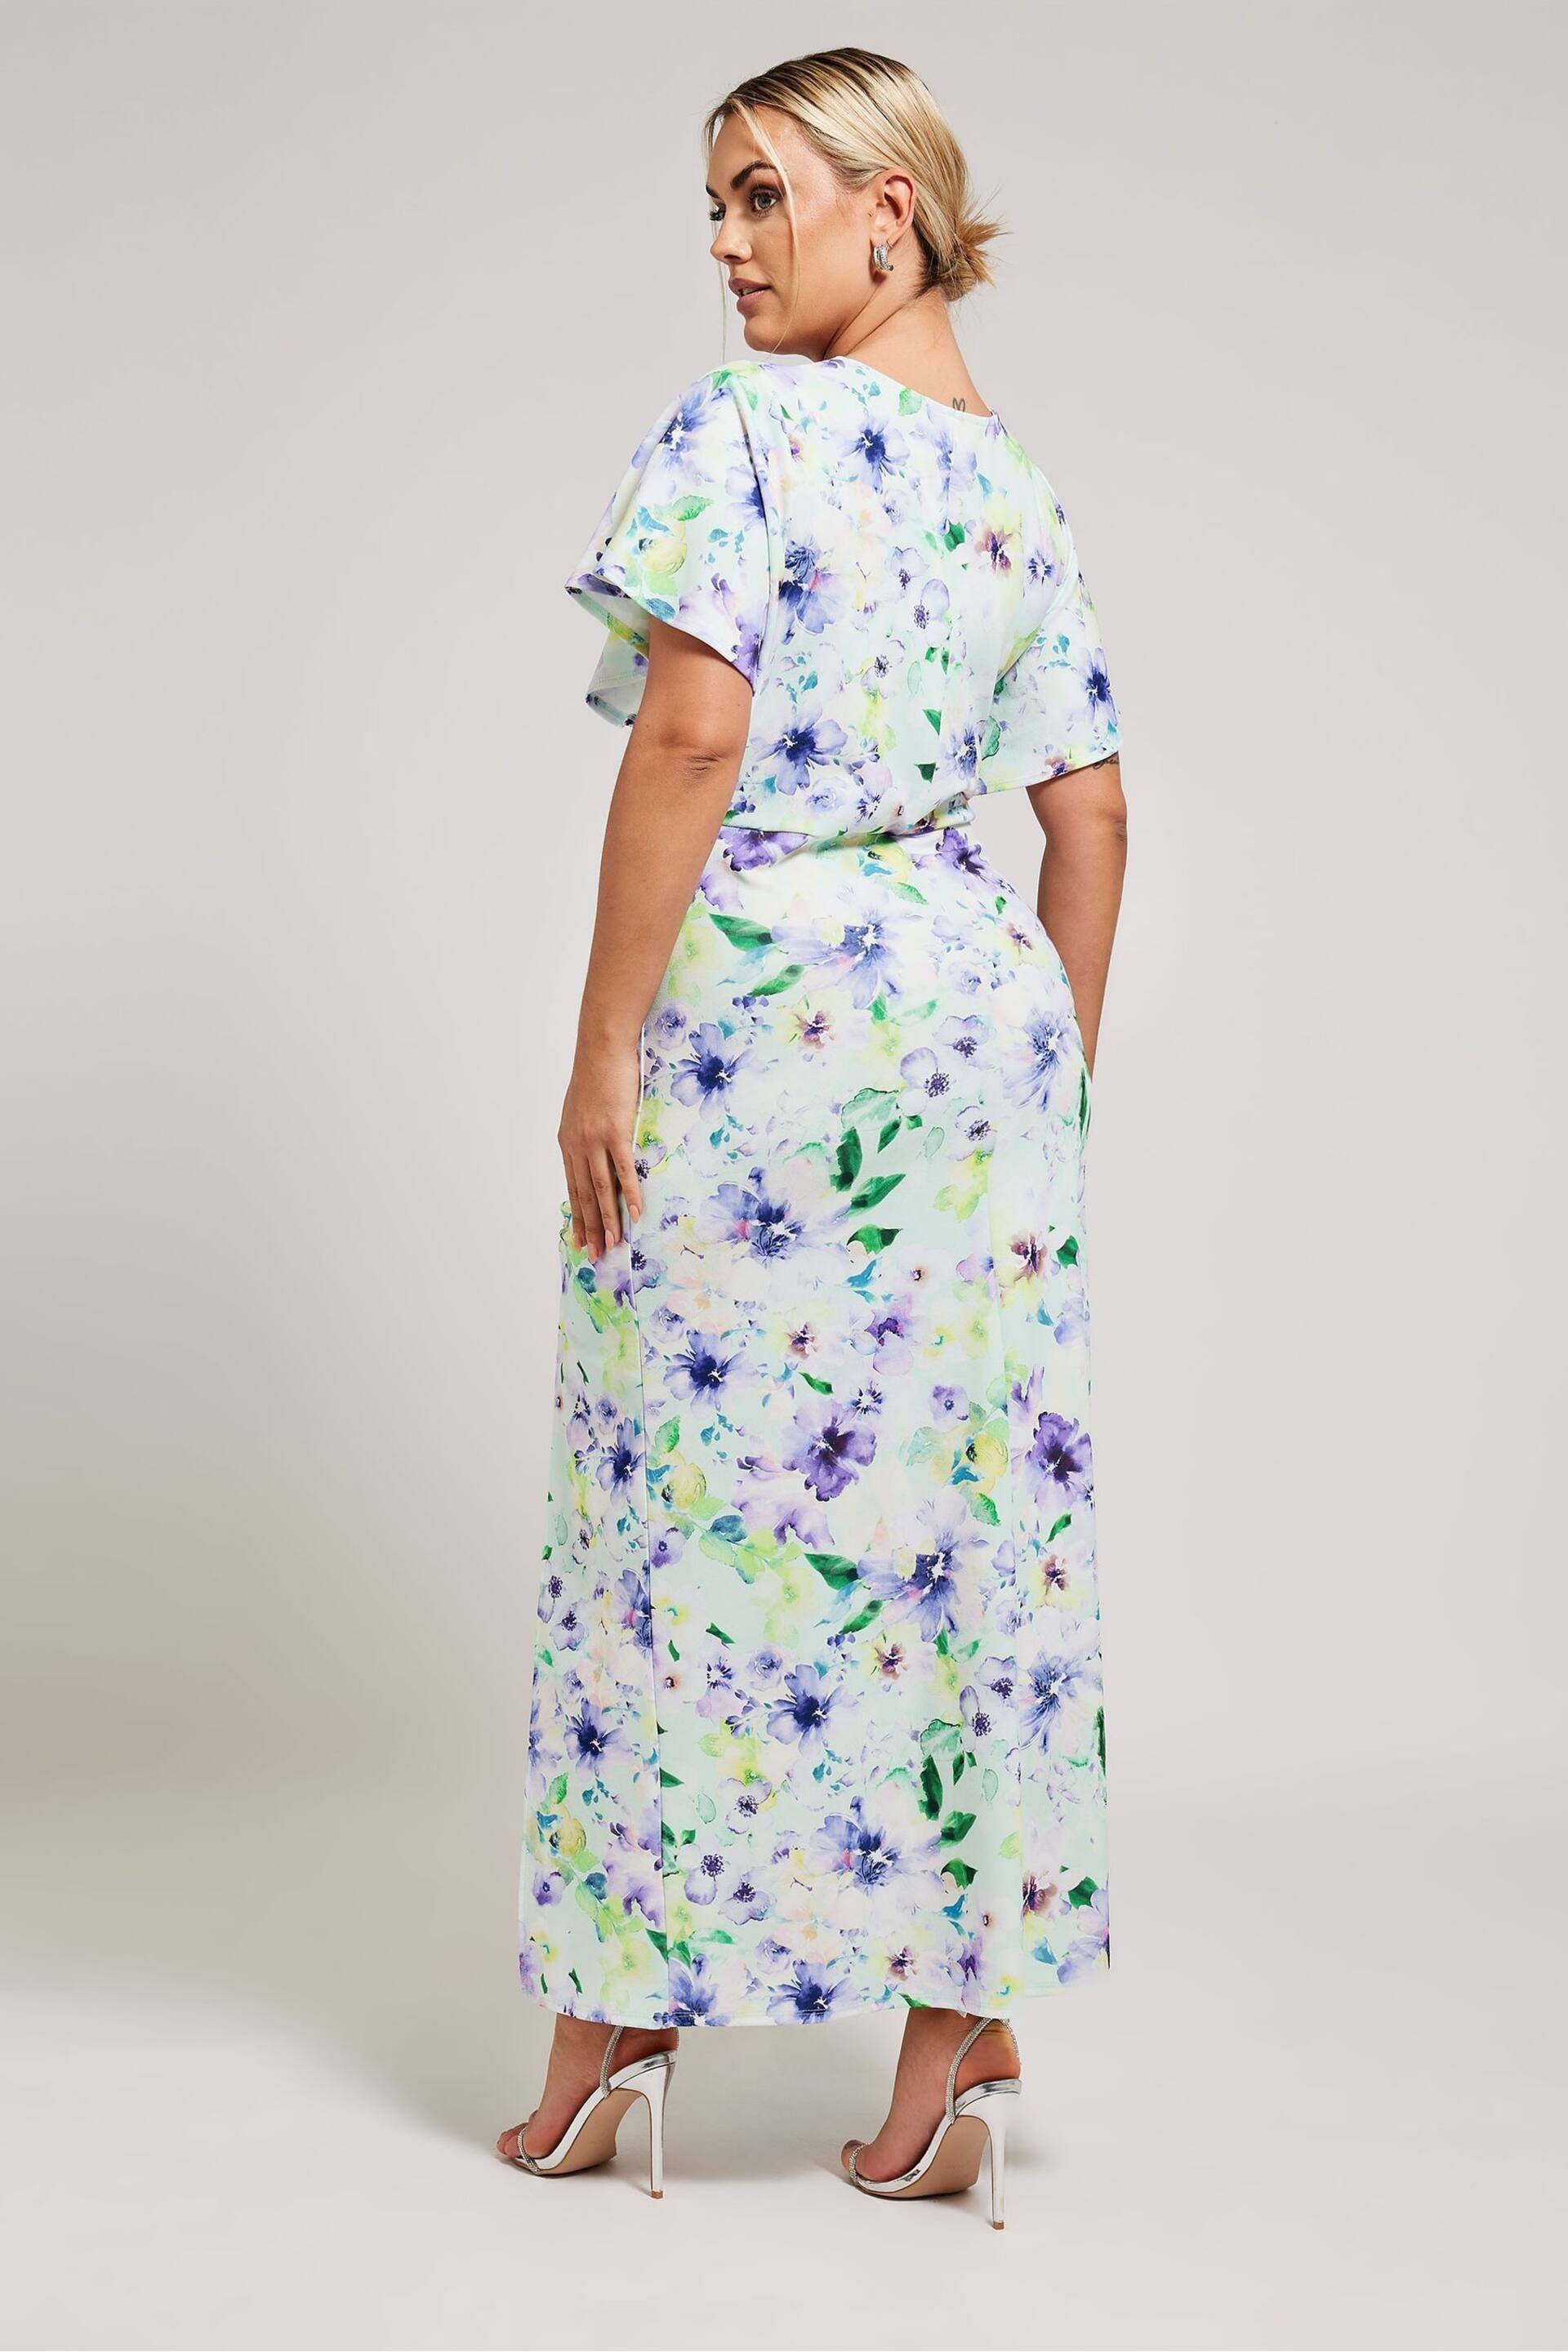 Yours Curve Green Floral Print Gathered Dress - Image 3 of 5